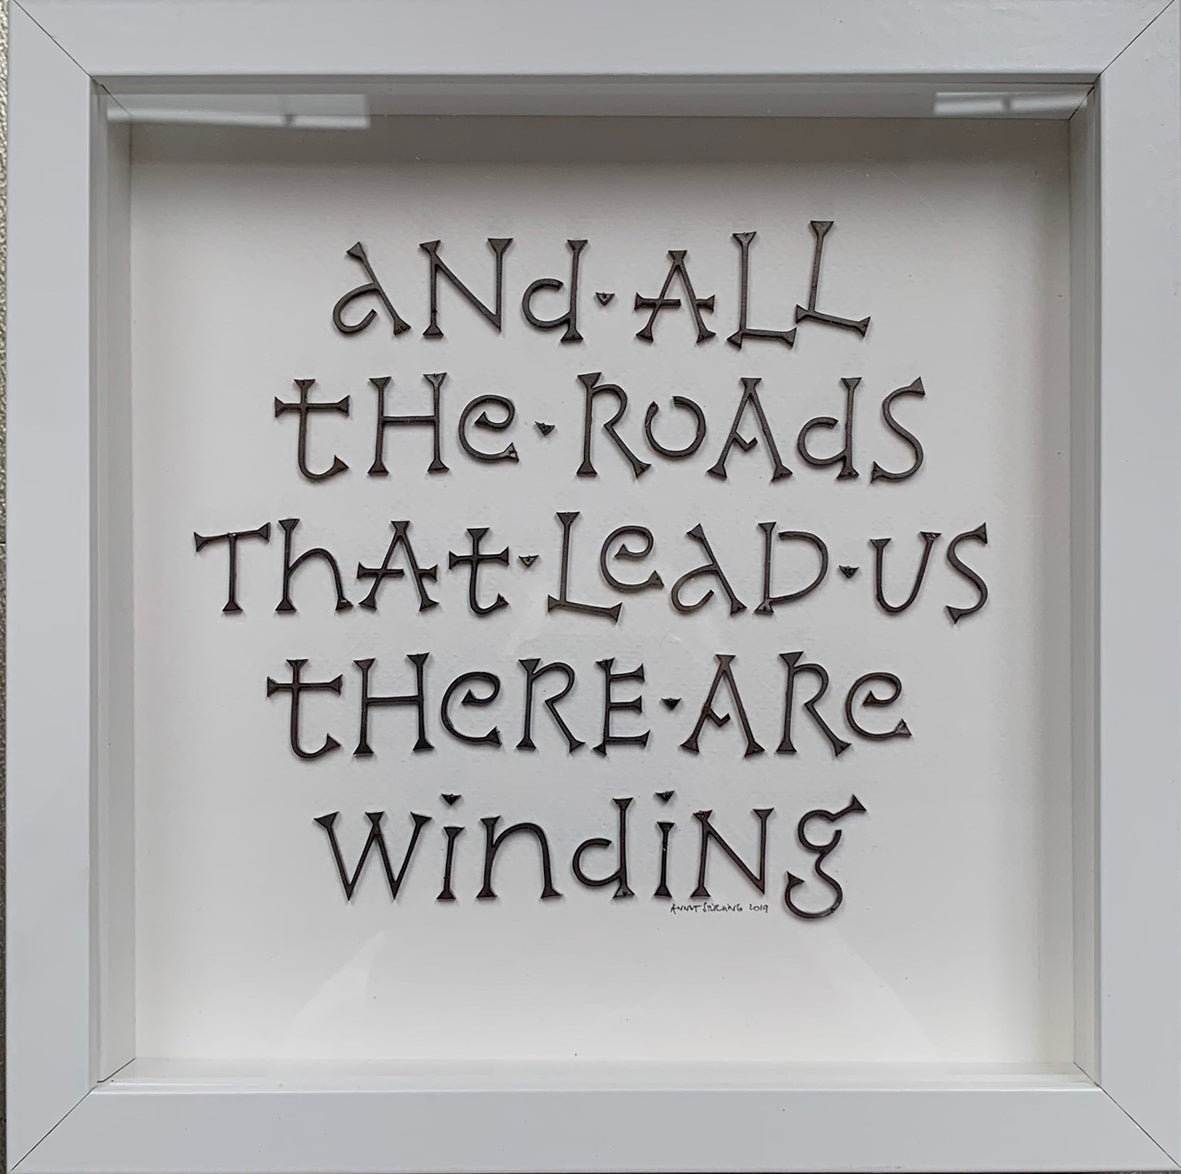 And all the Roads - Corten steel letters on paper by Annet Stirling